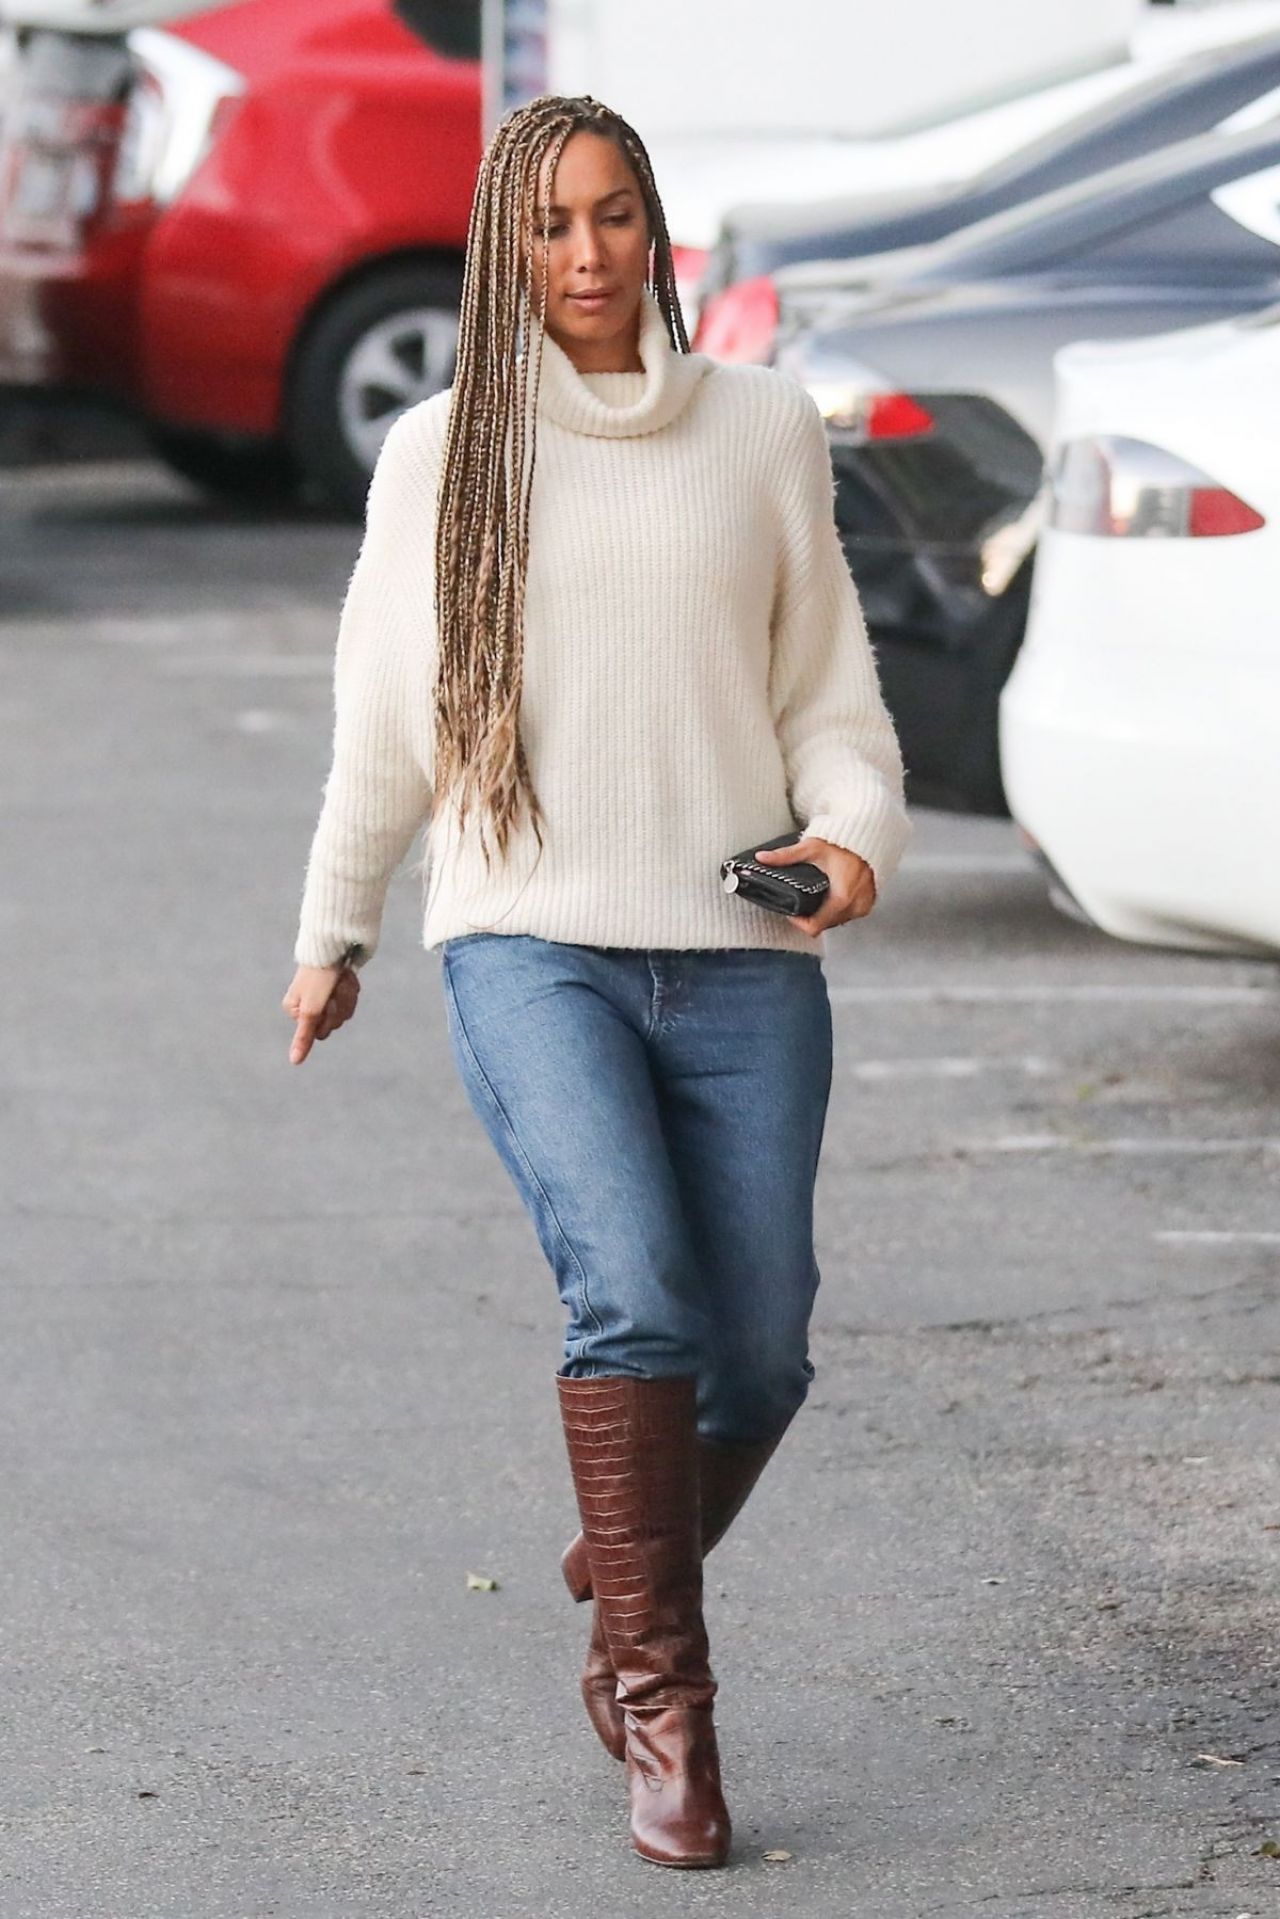 Leona Lewis - Out in West Hollywood 02/12/2020 • CelebMafia